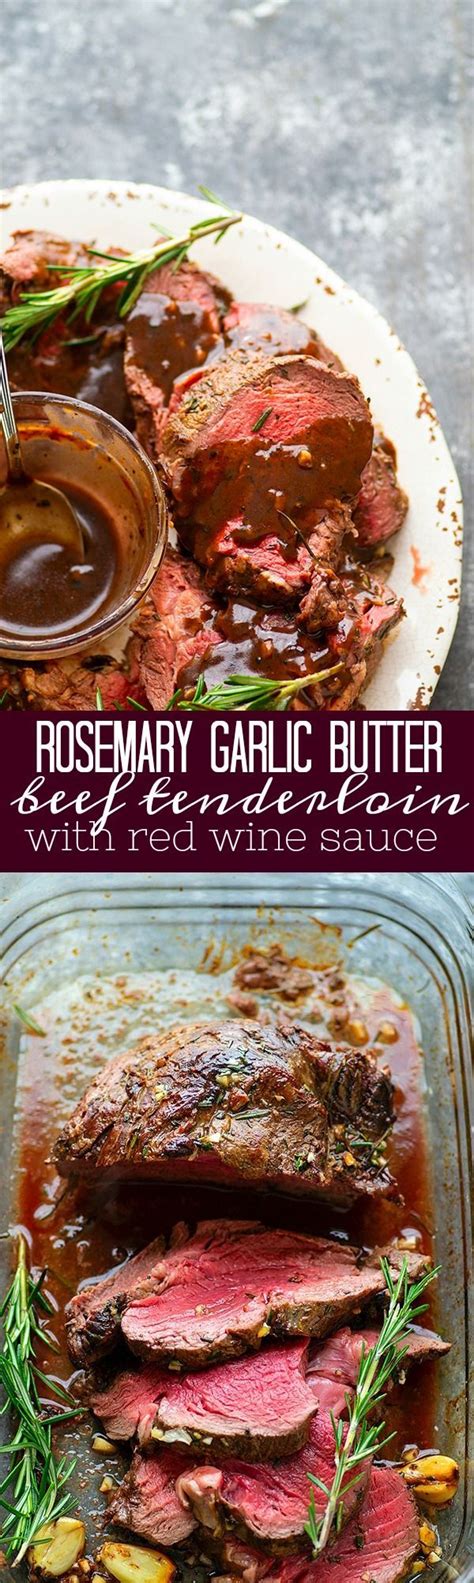 This beef tenderloin recipe is actually insanely easy to make, thanks to a marinade made up of ingredients you probably already have and a surprisingly quick cook time. Rosemary Garlic Butter Beef Tenderloin with Red Wine Sauce ...